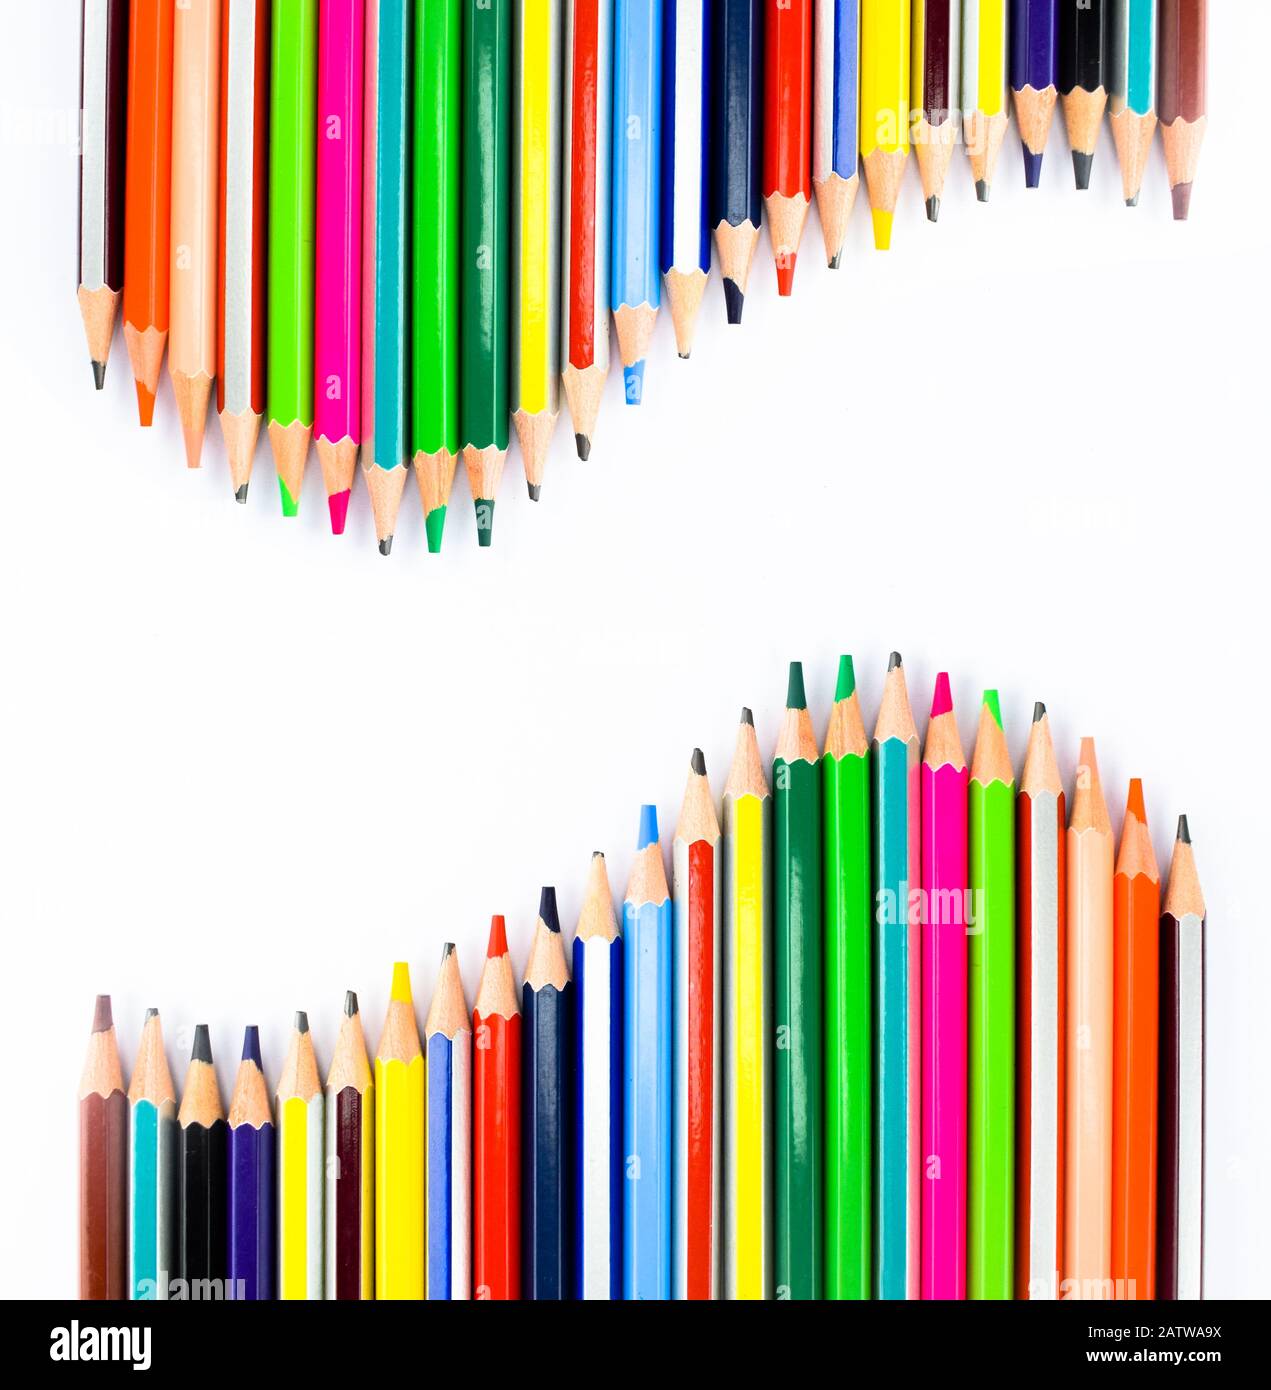 Two similar row of different colored pencil crayons arranged facing each-other on a white background Stock Photo